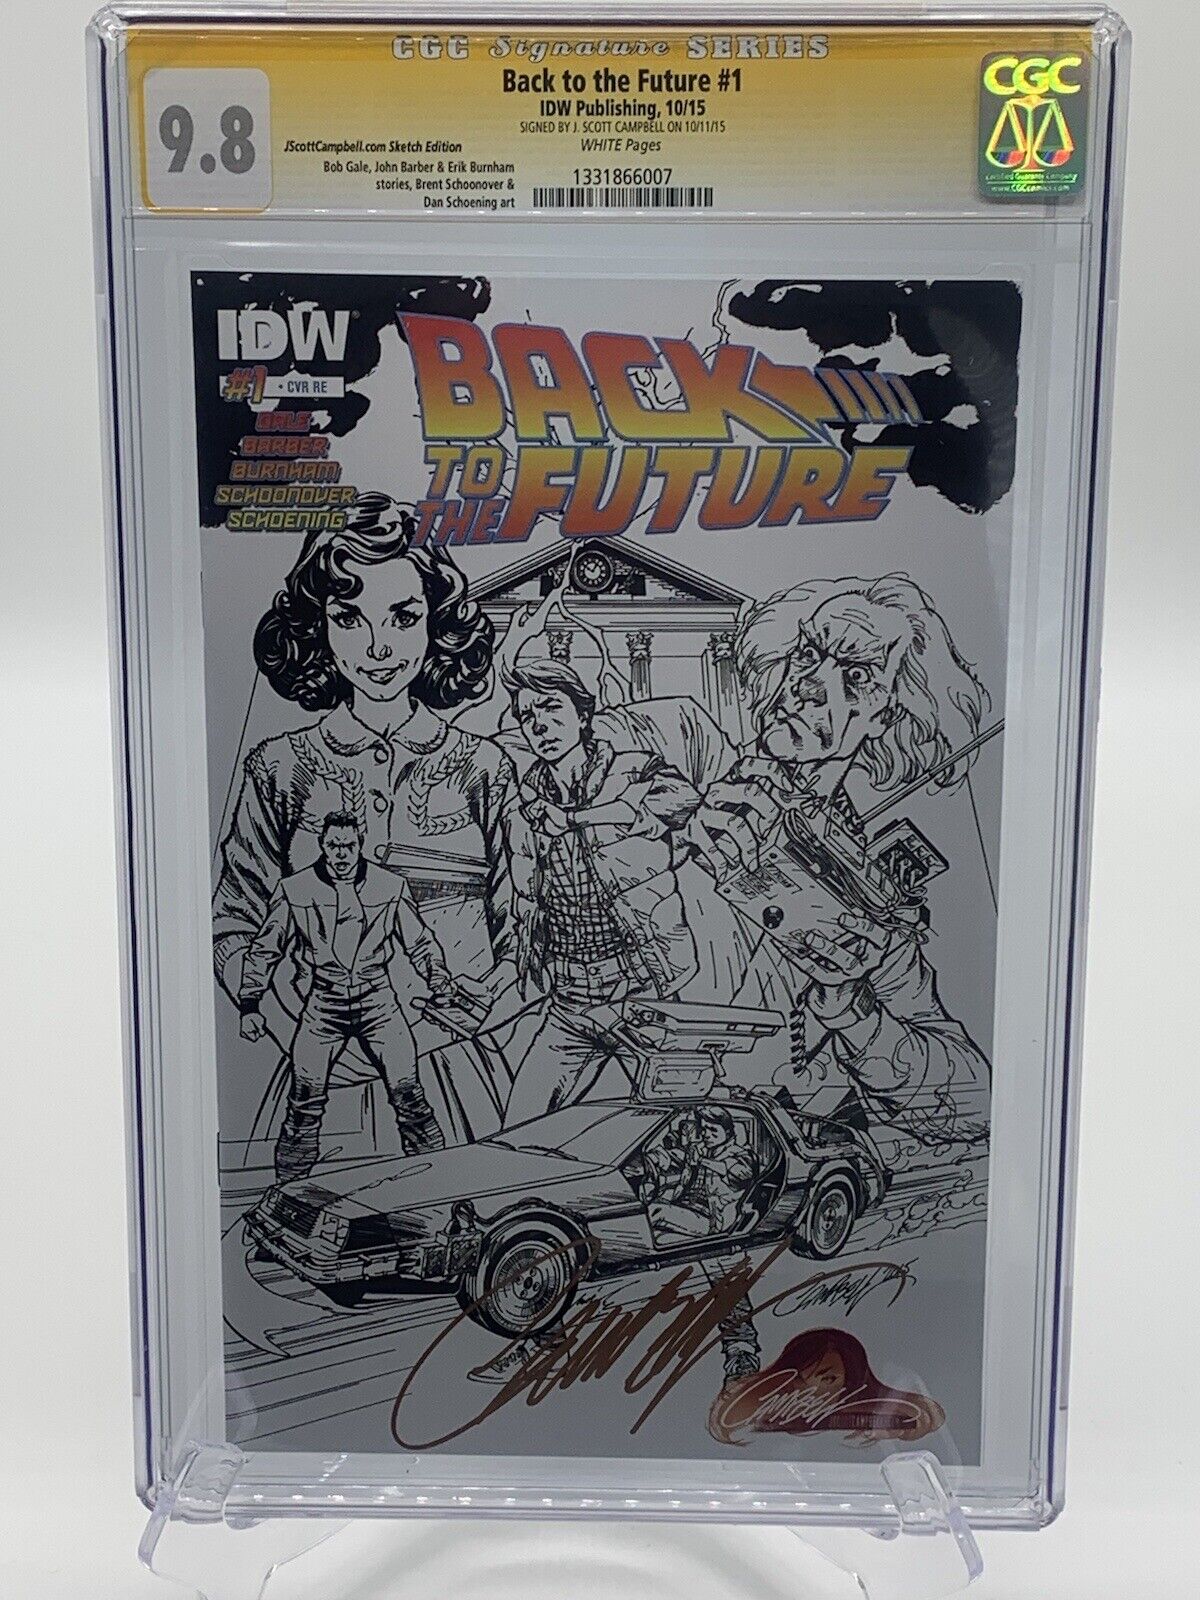 Back To The Future #1 IDW Signed Campbell Sketch Edition CGC Yellow Label 9.8